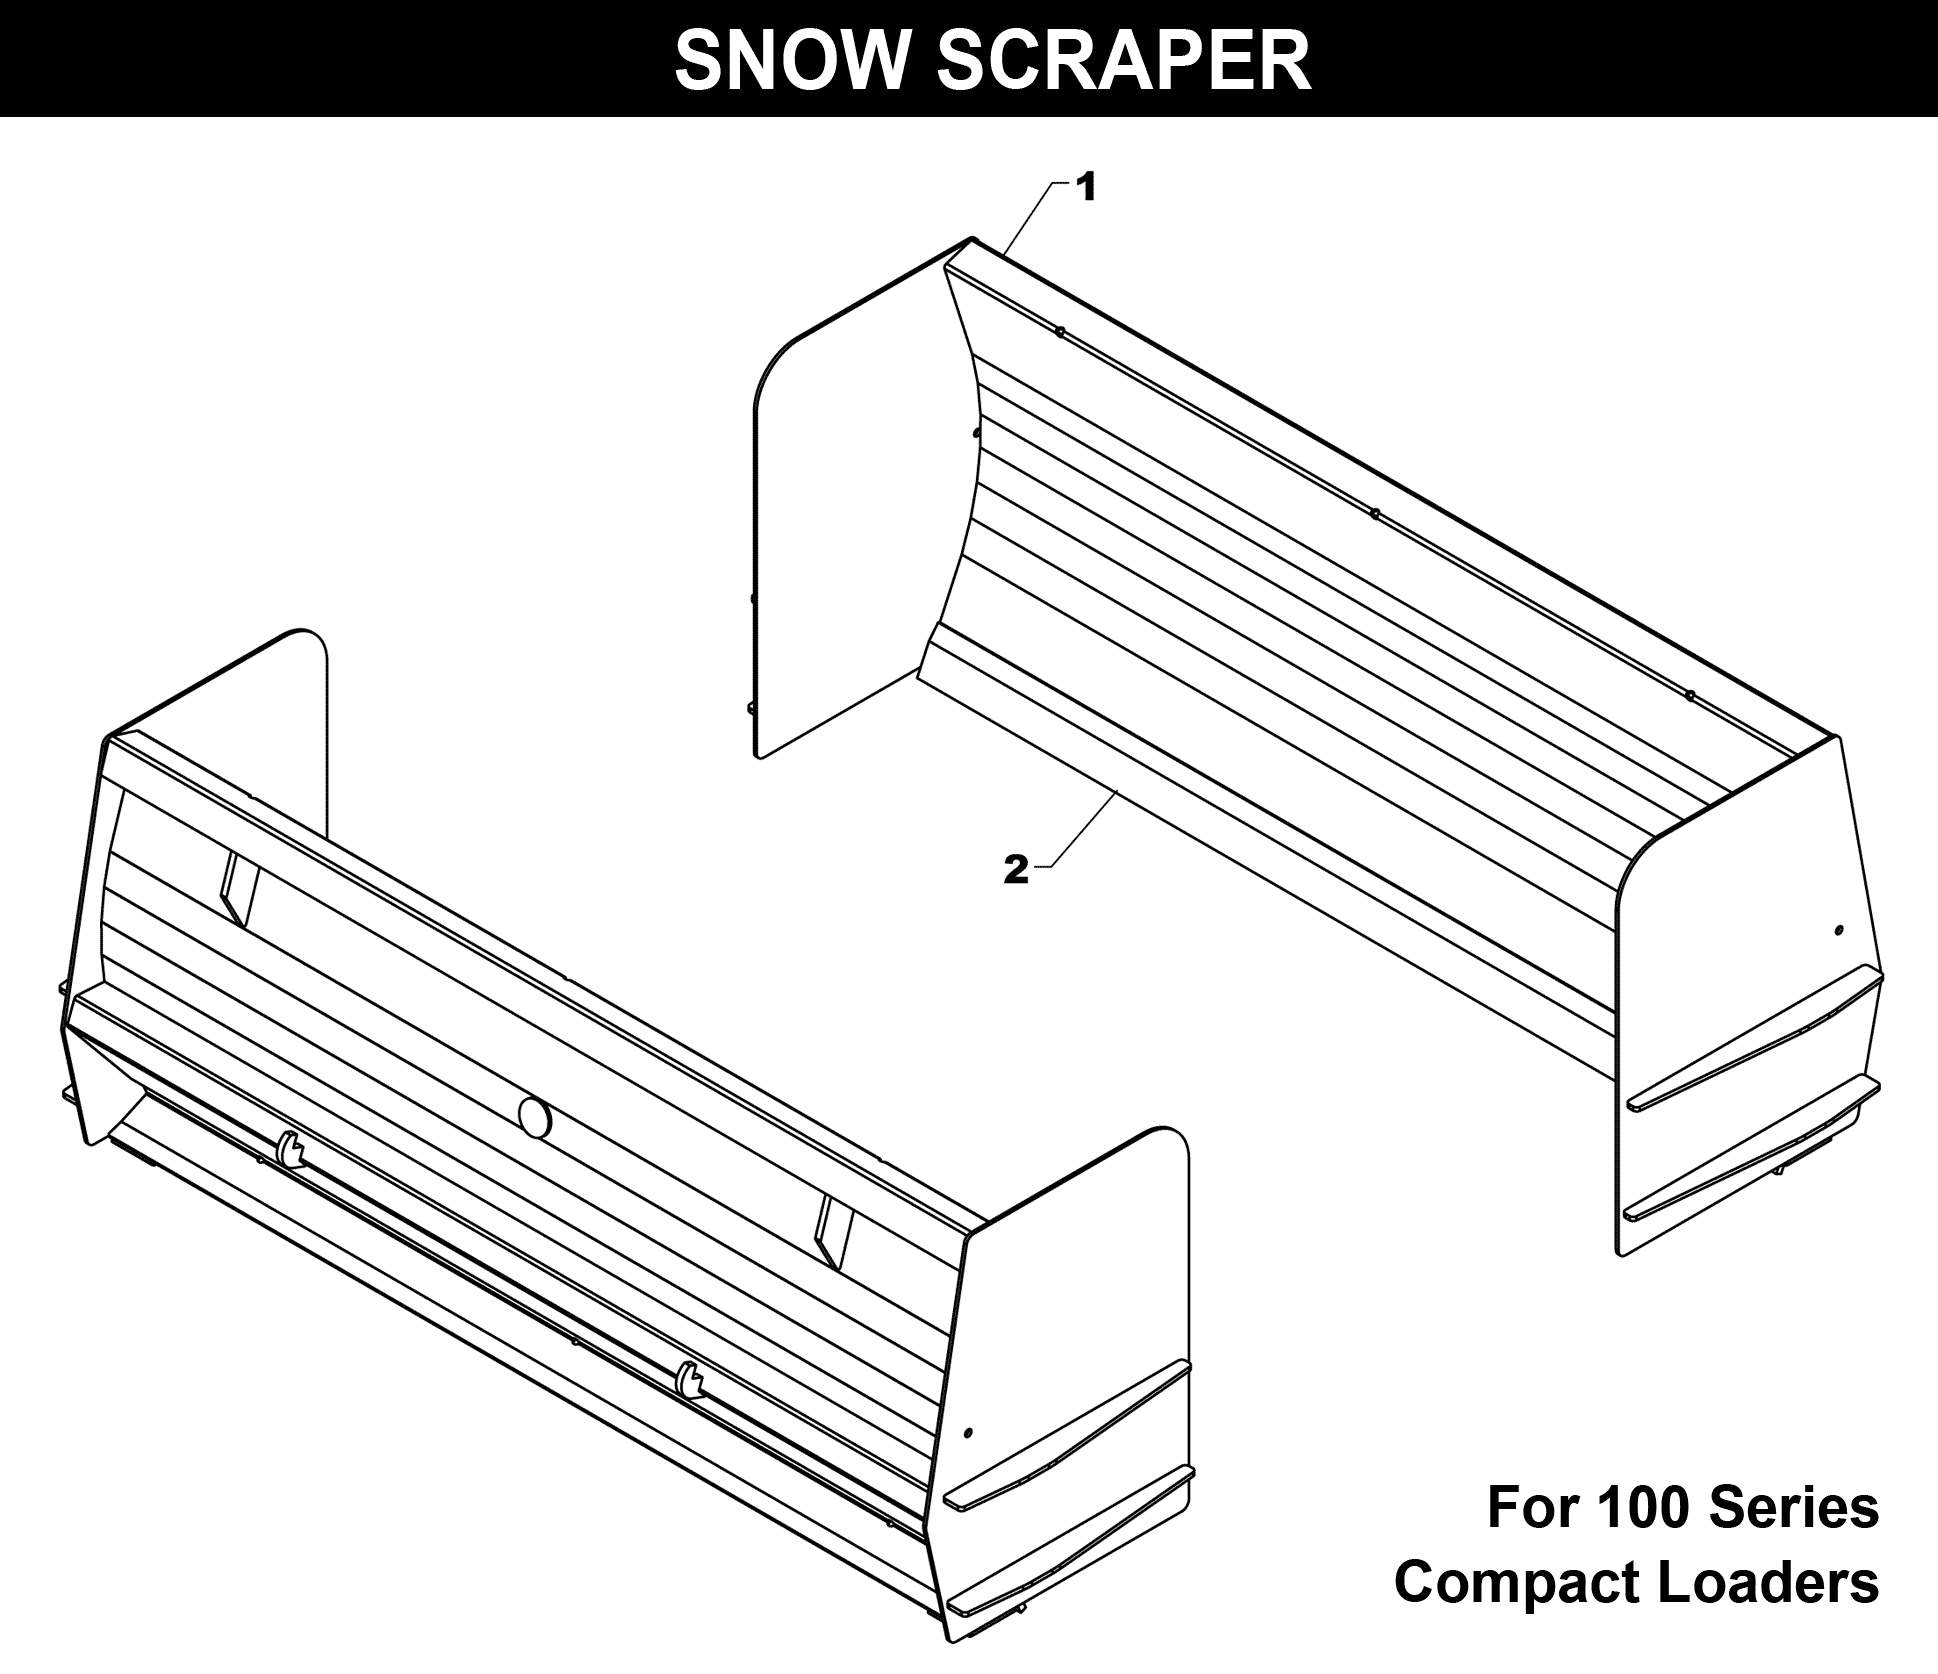 Snow Scrapers - 100 Series Compact